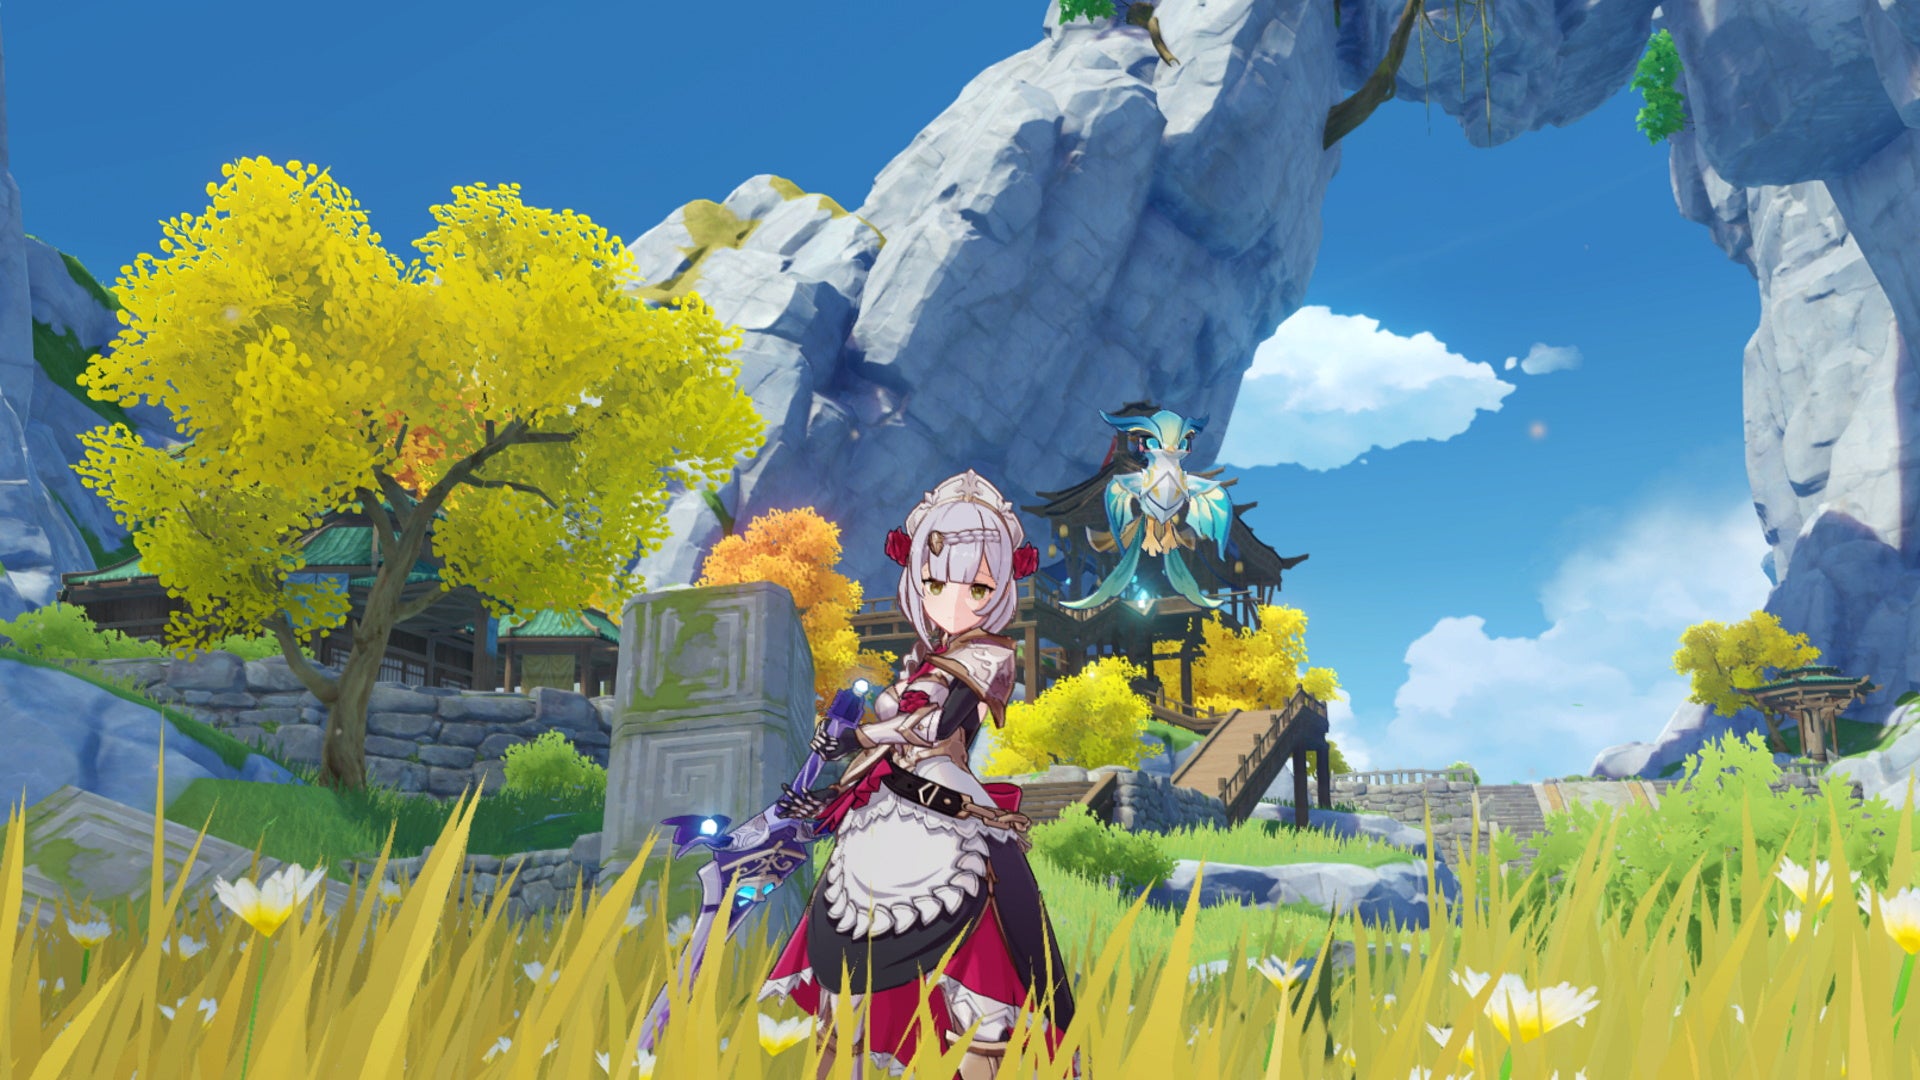 Genshin Impact Noelle build: An anime woman in silver armor and a maid's apron wields a large sword in the middle of a field